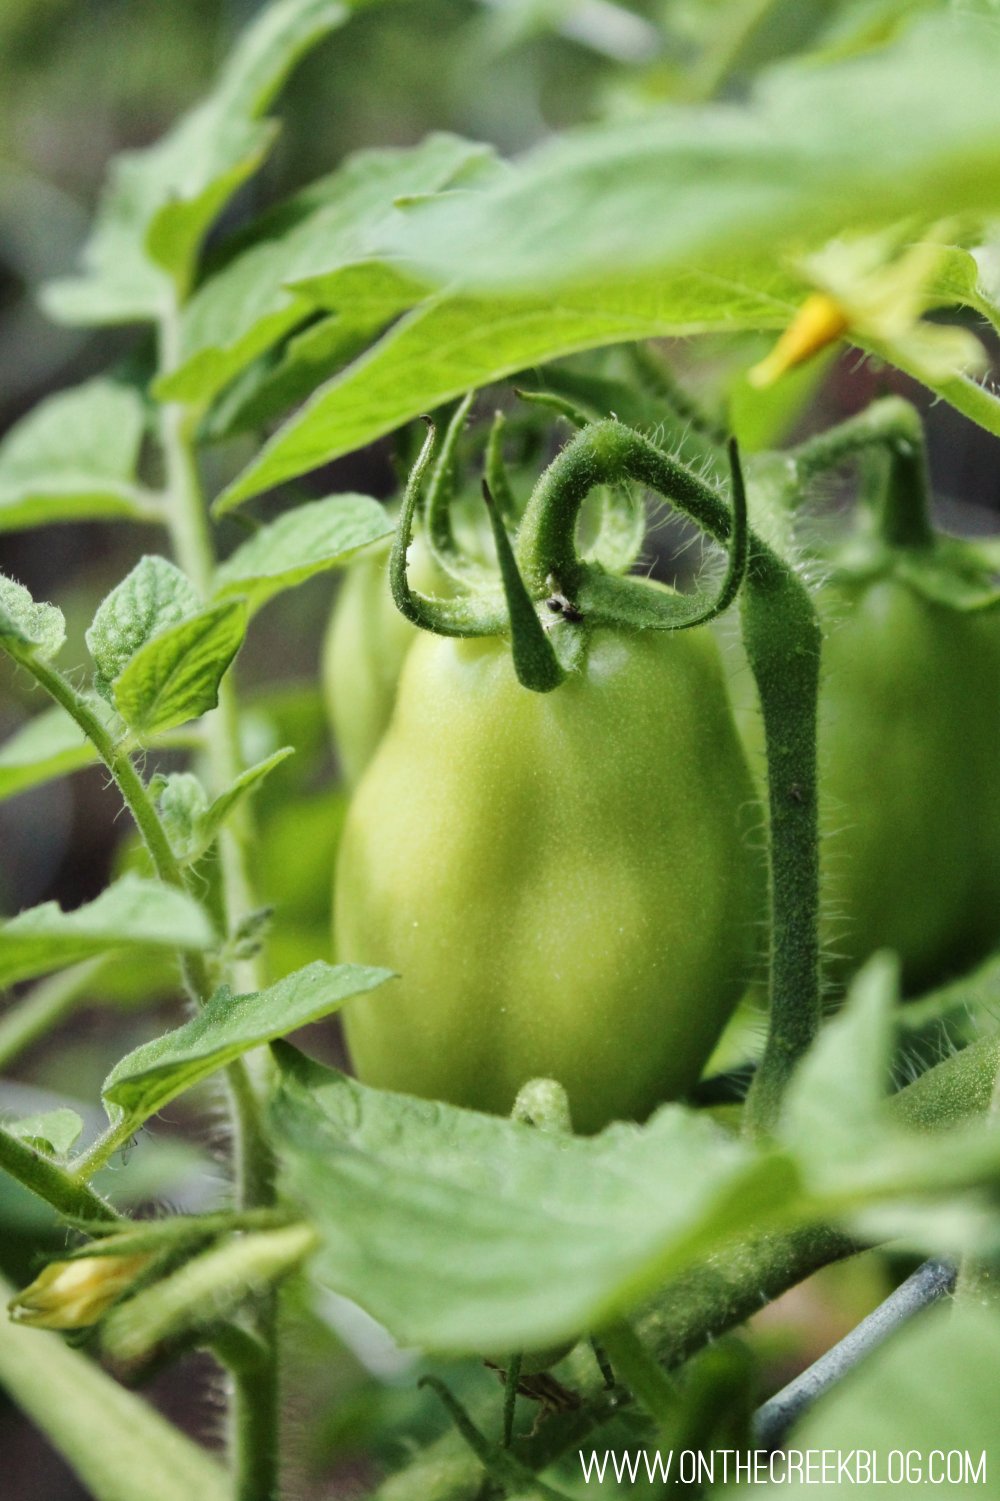 Roma tomato plant with green tomatoes